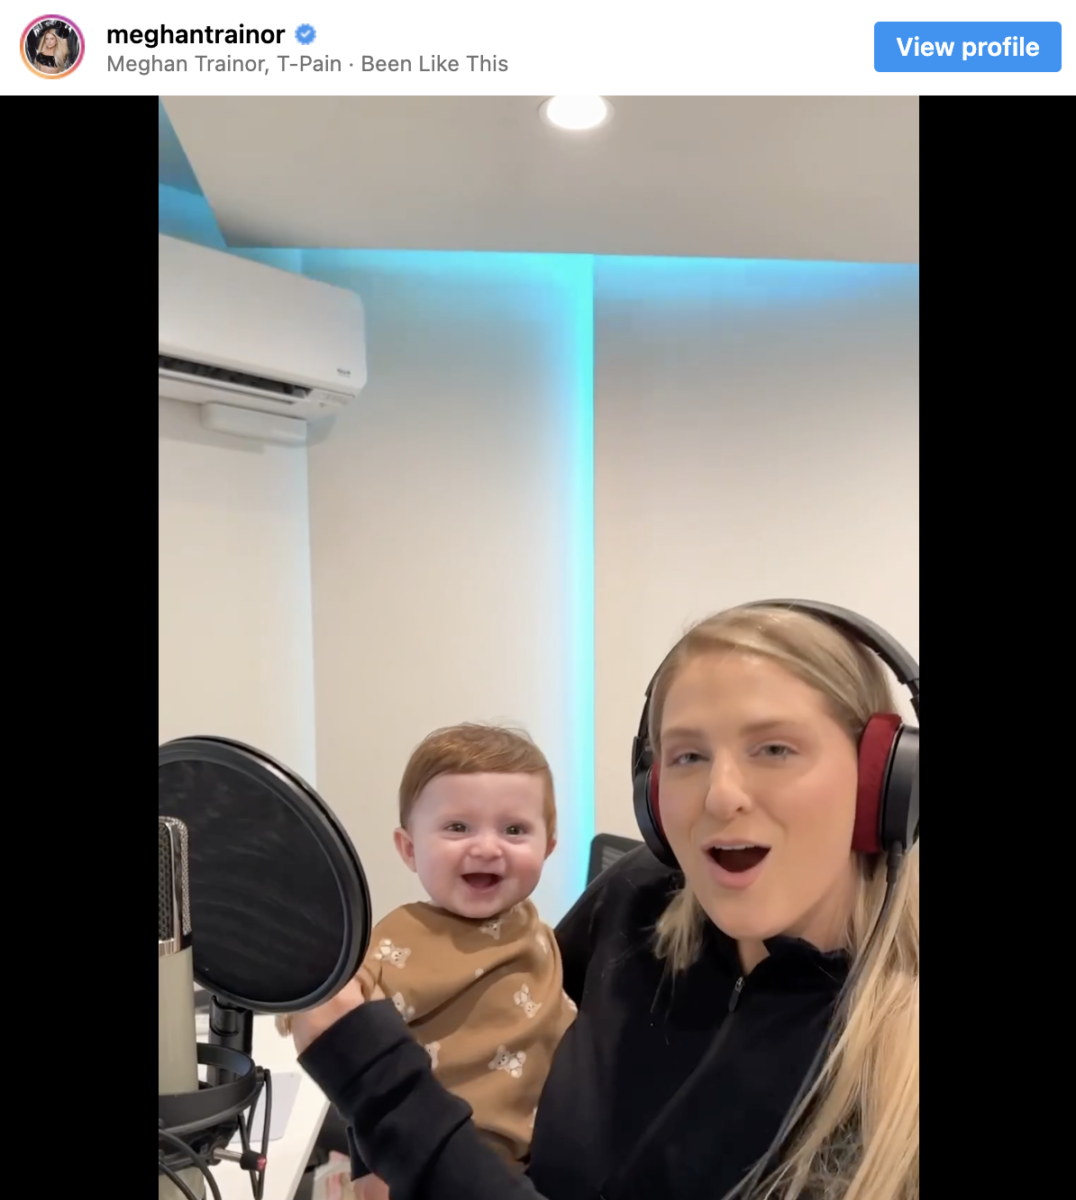 Moms Praise Meghan Trainor After She Shares Video of Her Youngest Son | Meghan Trainor is a world-renowned pop star and song writer. And while she’s topped the charts and written songs for some of the world’s favorites, including Rascal Flats, Fifth Harmony, Jennifer Lopez, and more.